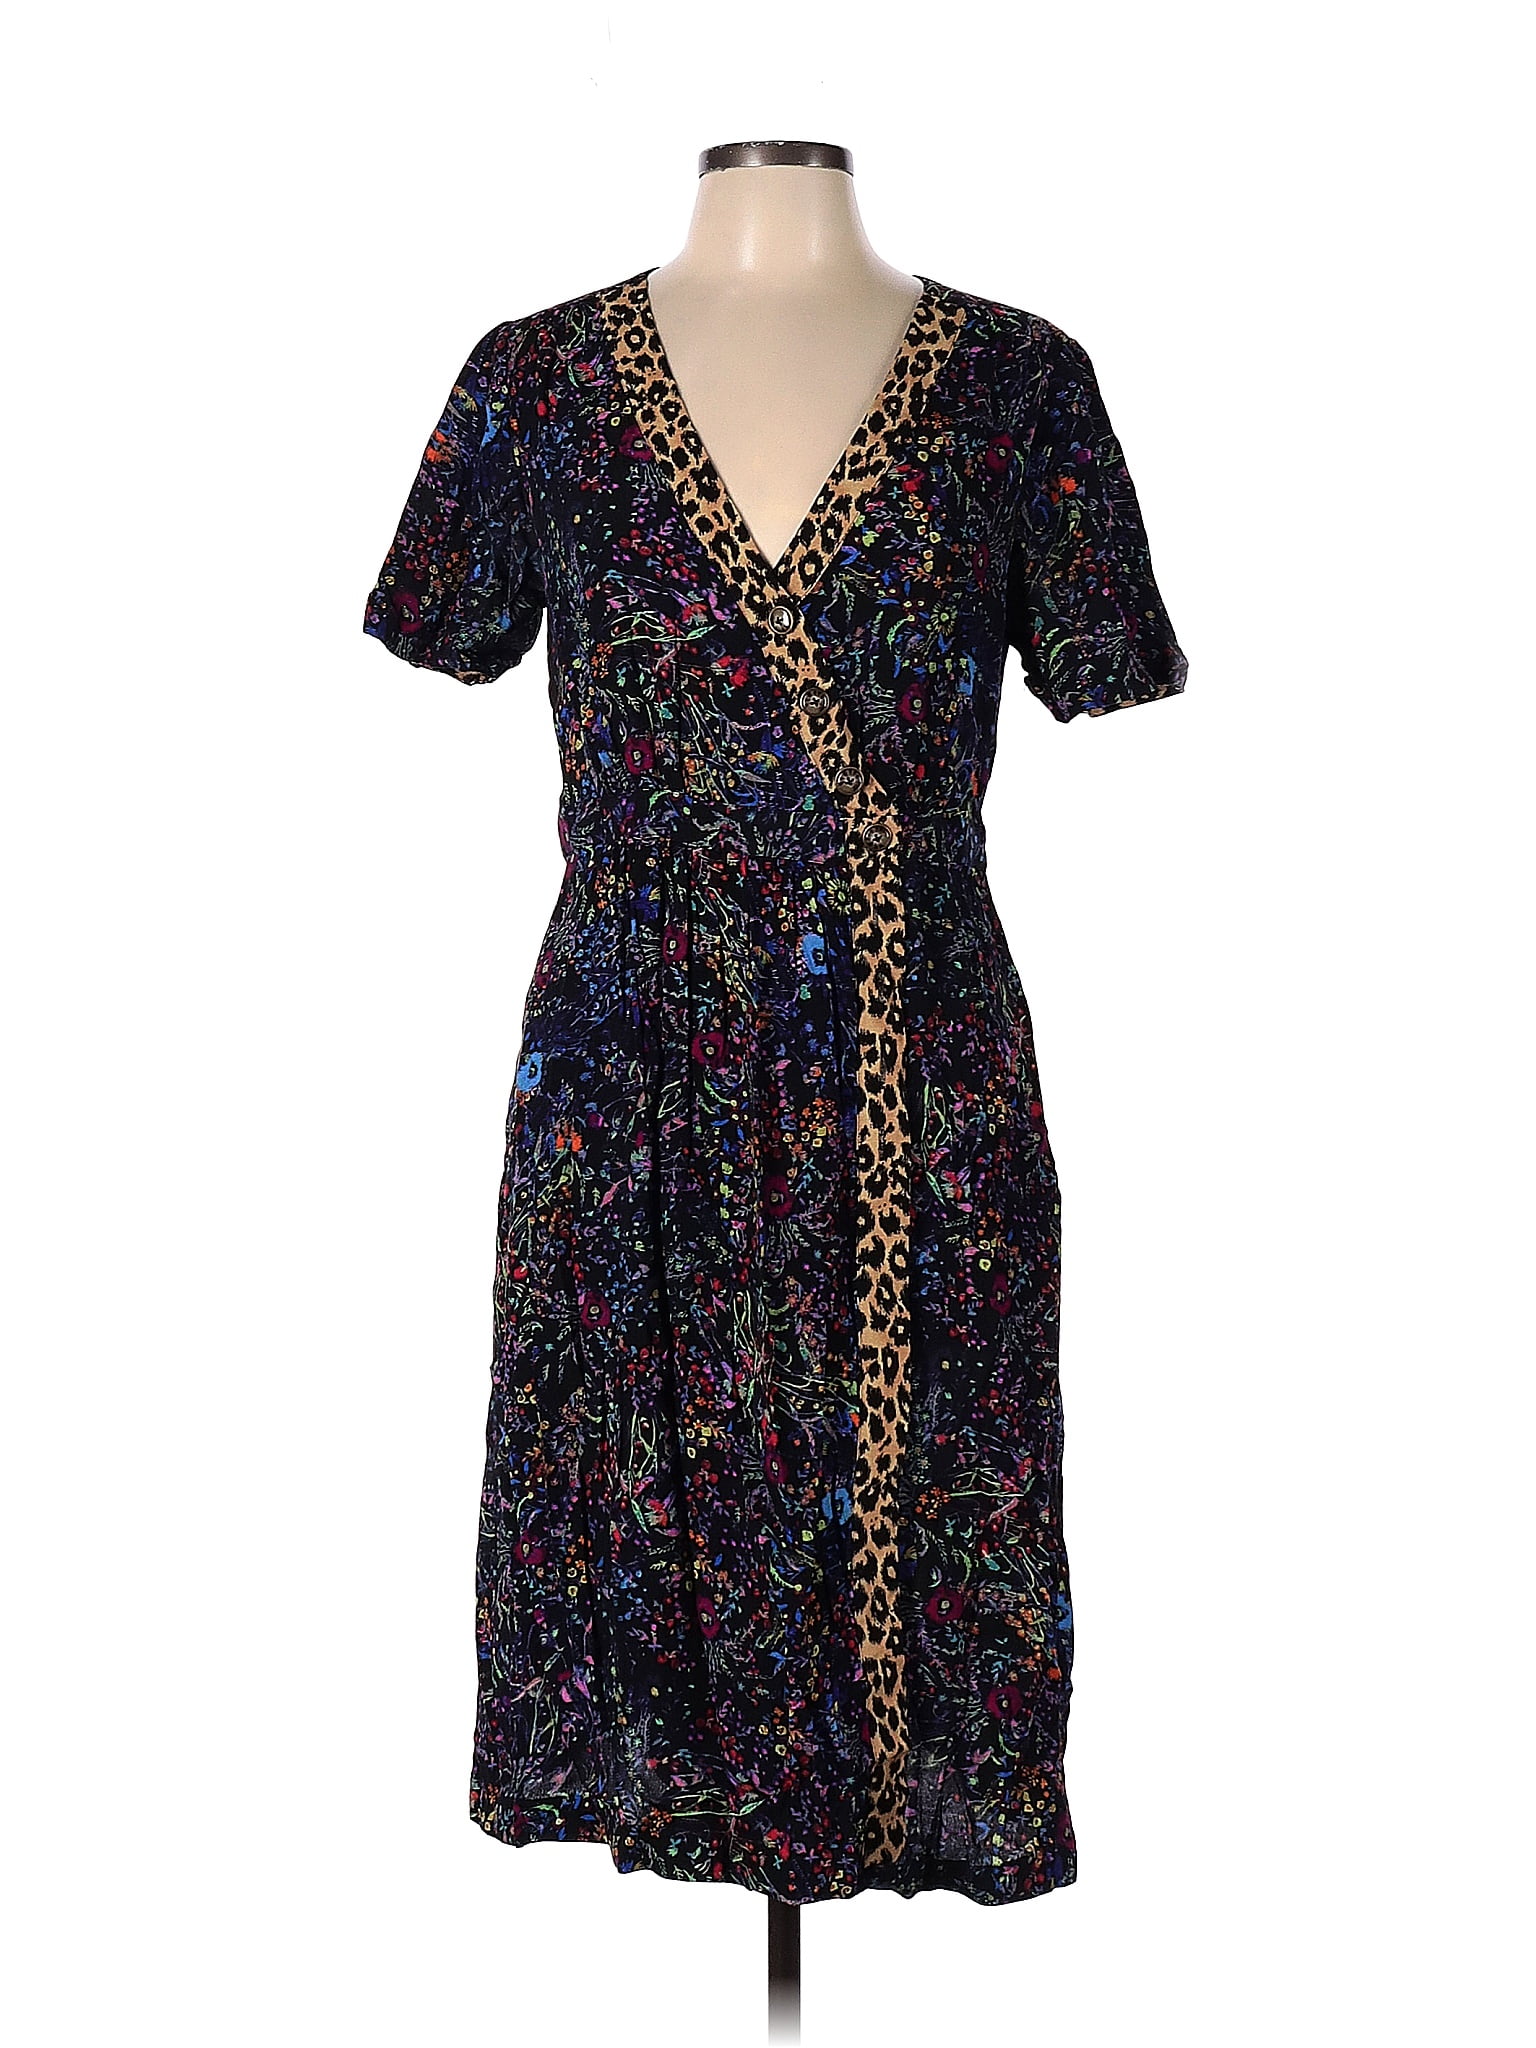 Maeve by Anthropologie 100% Viscose Multi Color Black Casual Dress Size ...